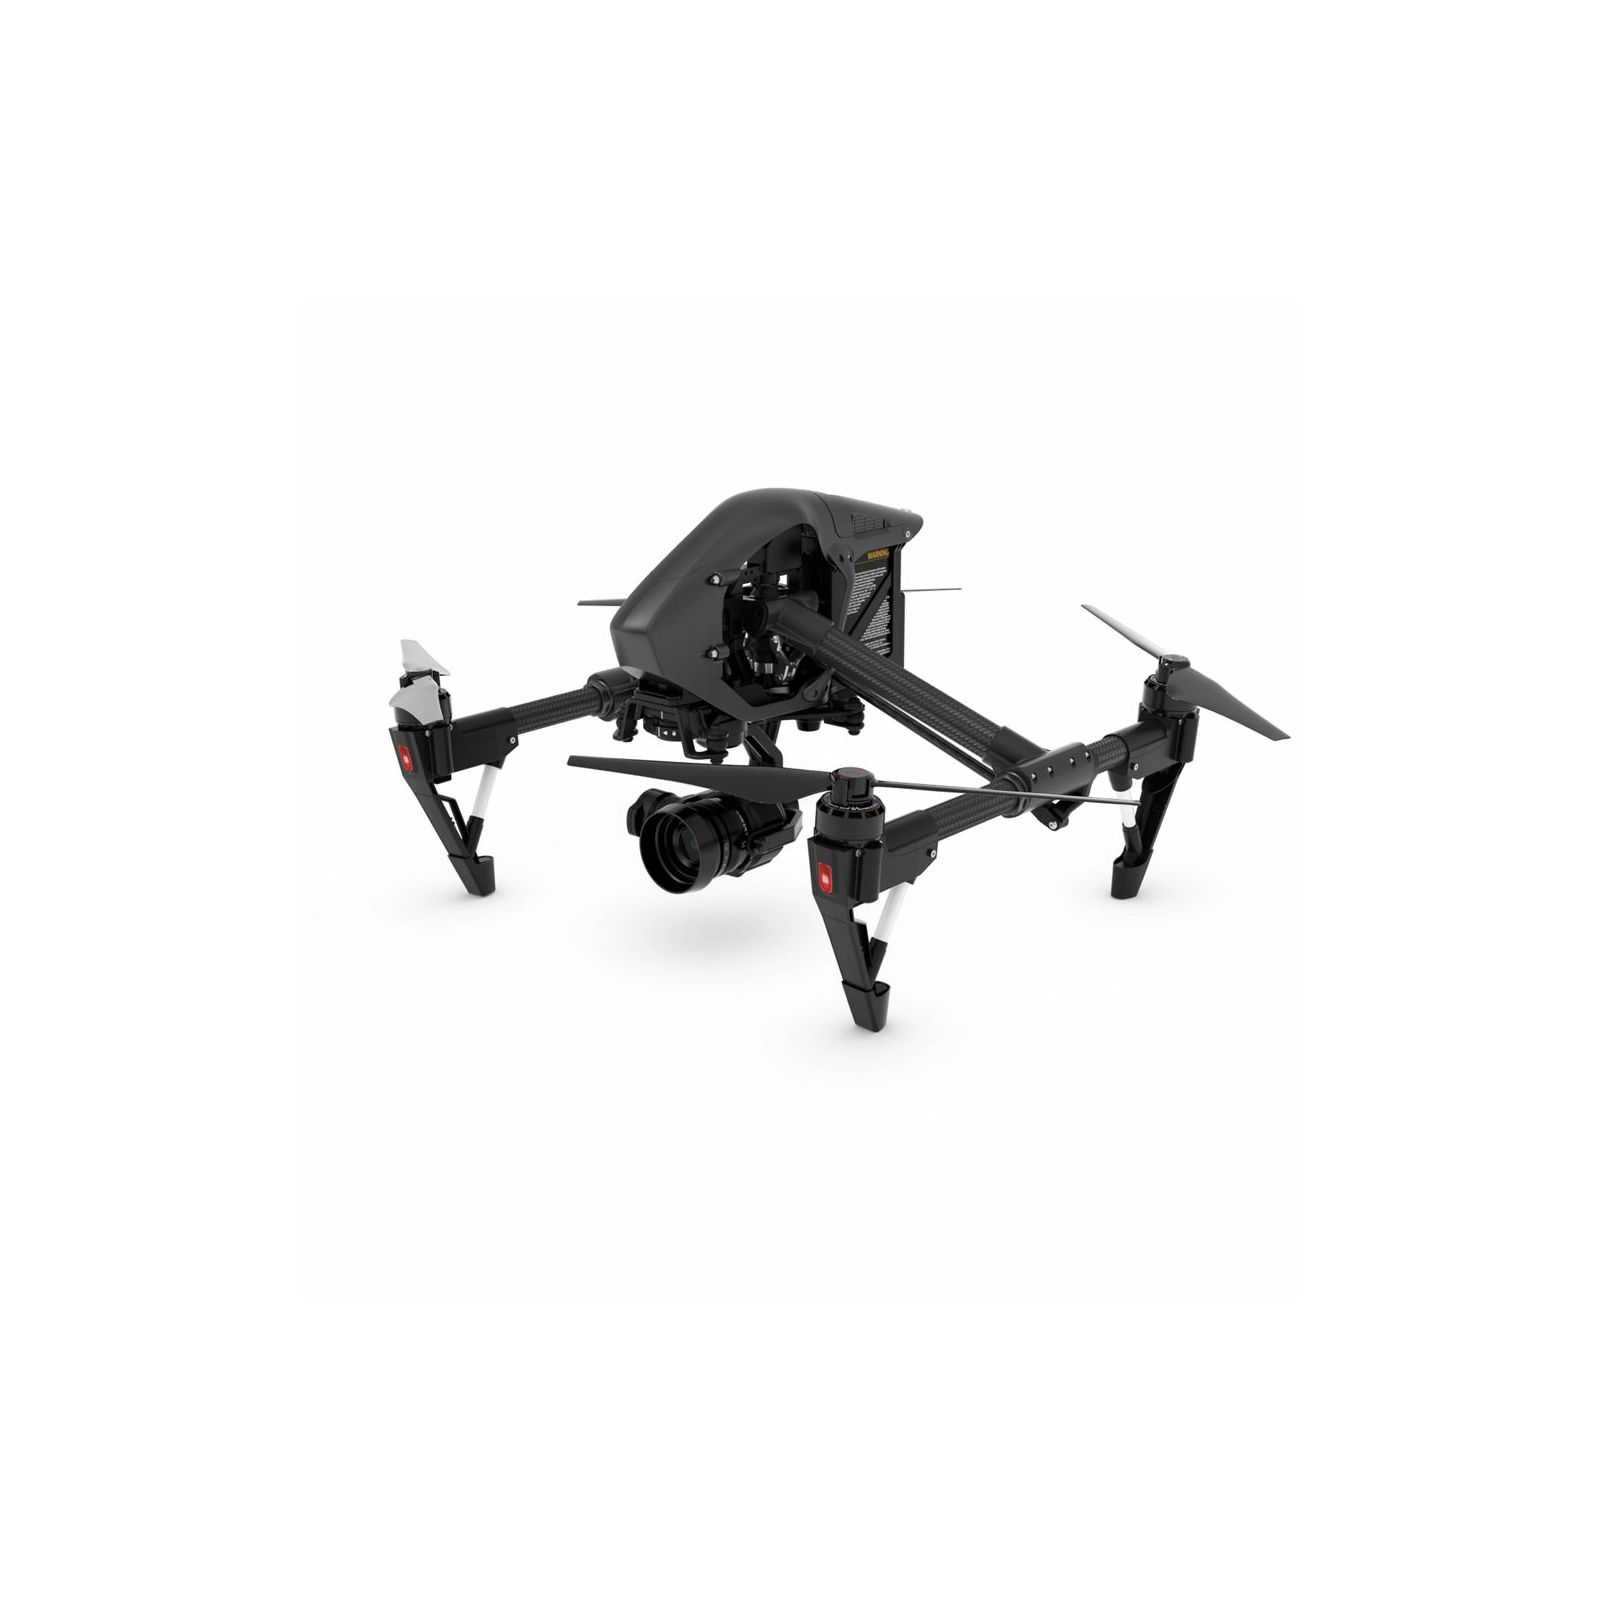 Inspire 1 PRO Black Edition Quadcopter with Zemuse X5 4K Camera and 3-Axis Gimbal